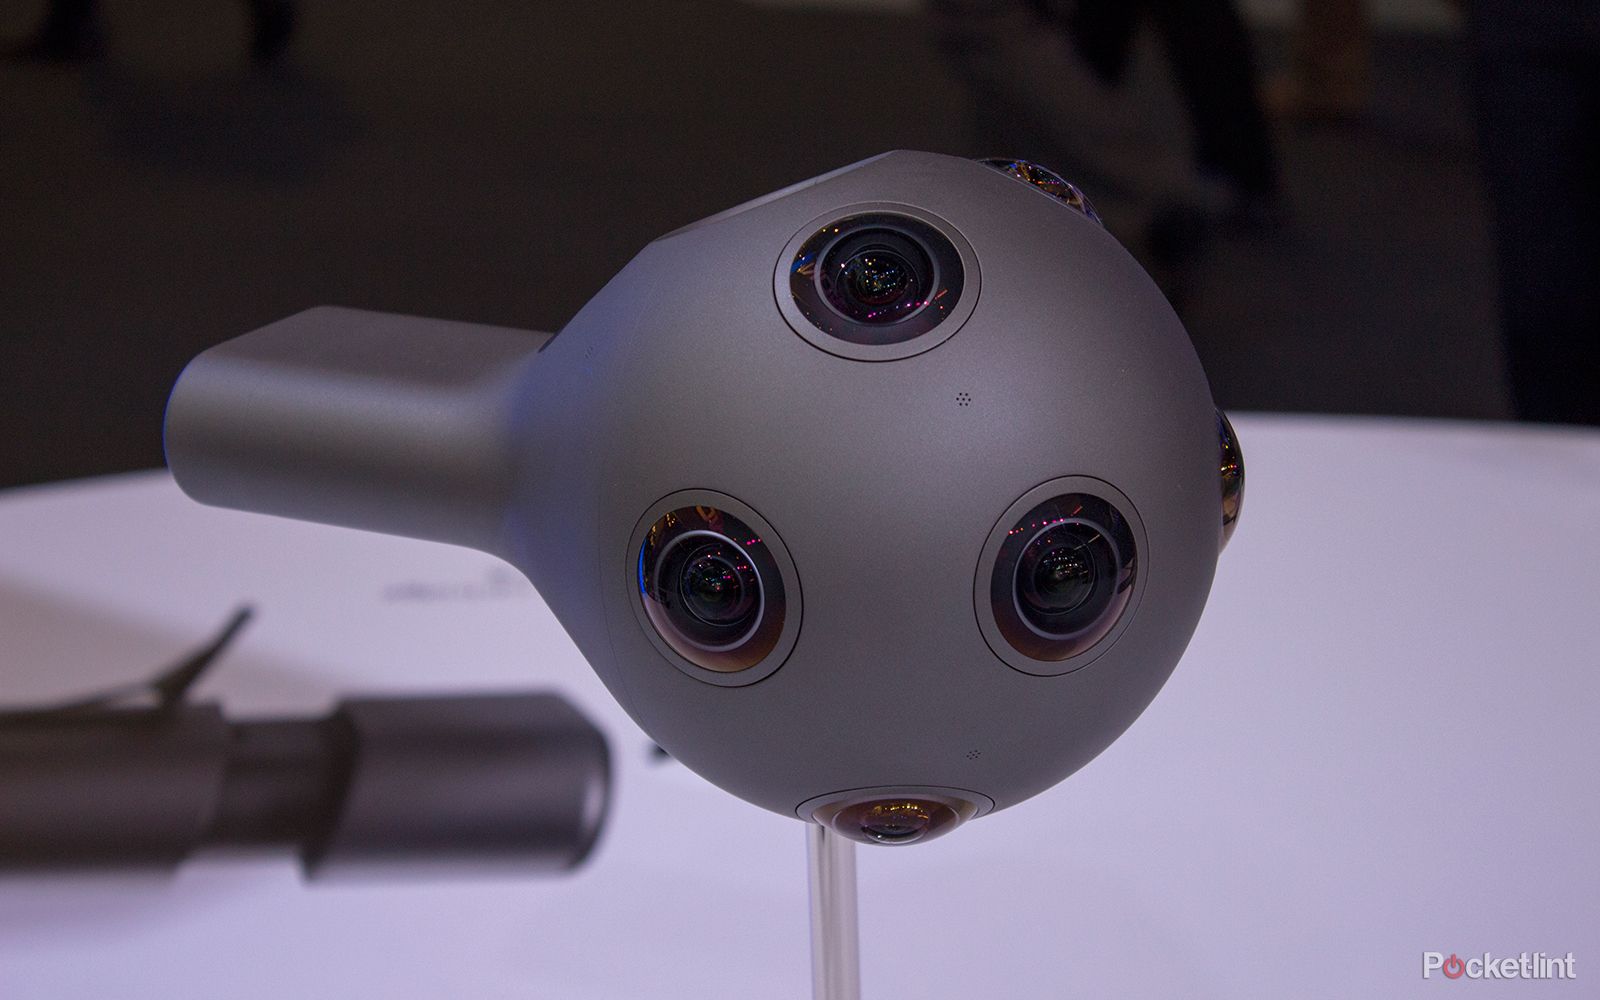 disney virtual reality content is coming nokia ozo to be used for filming image 1